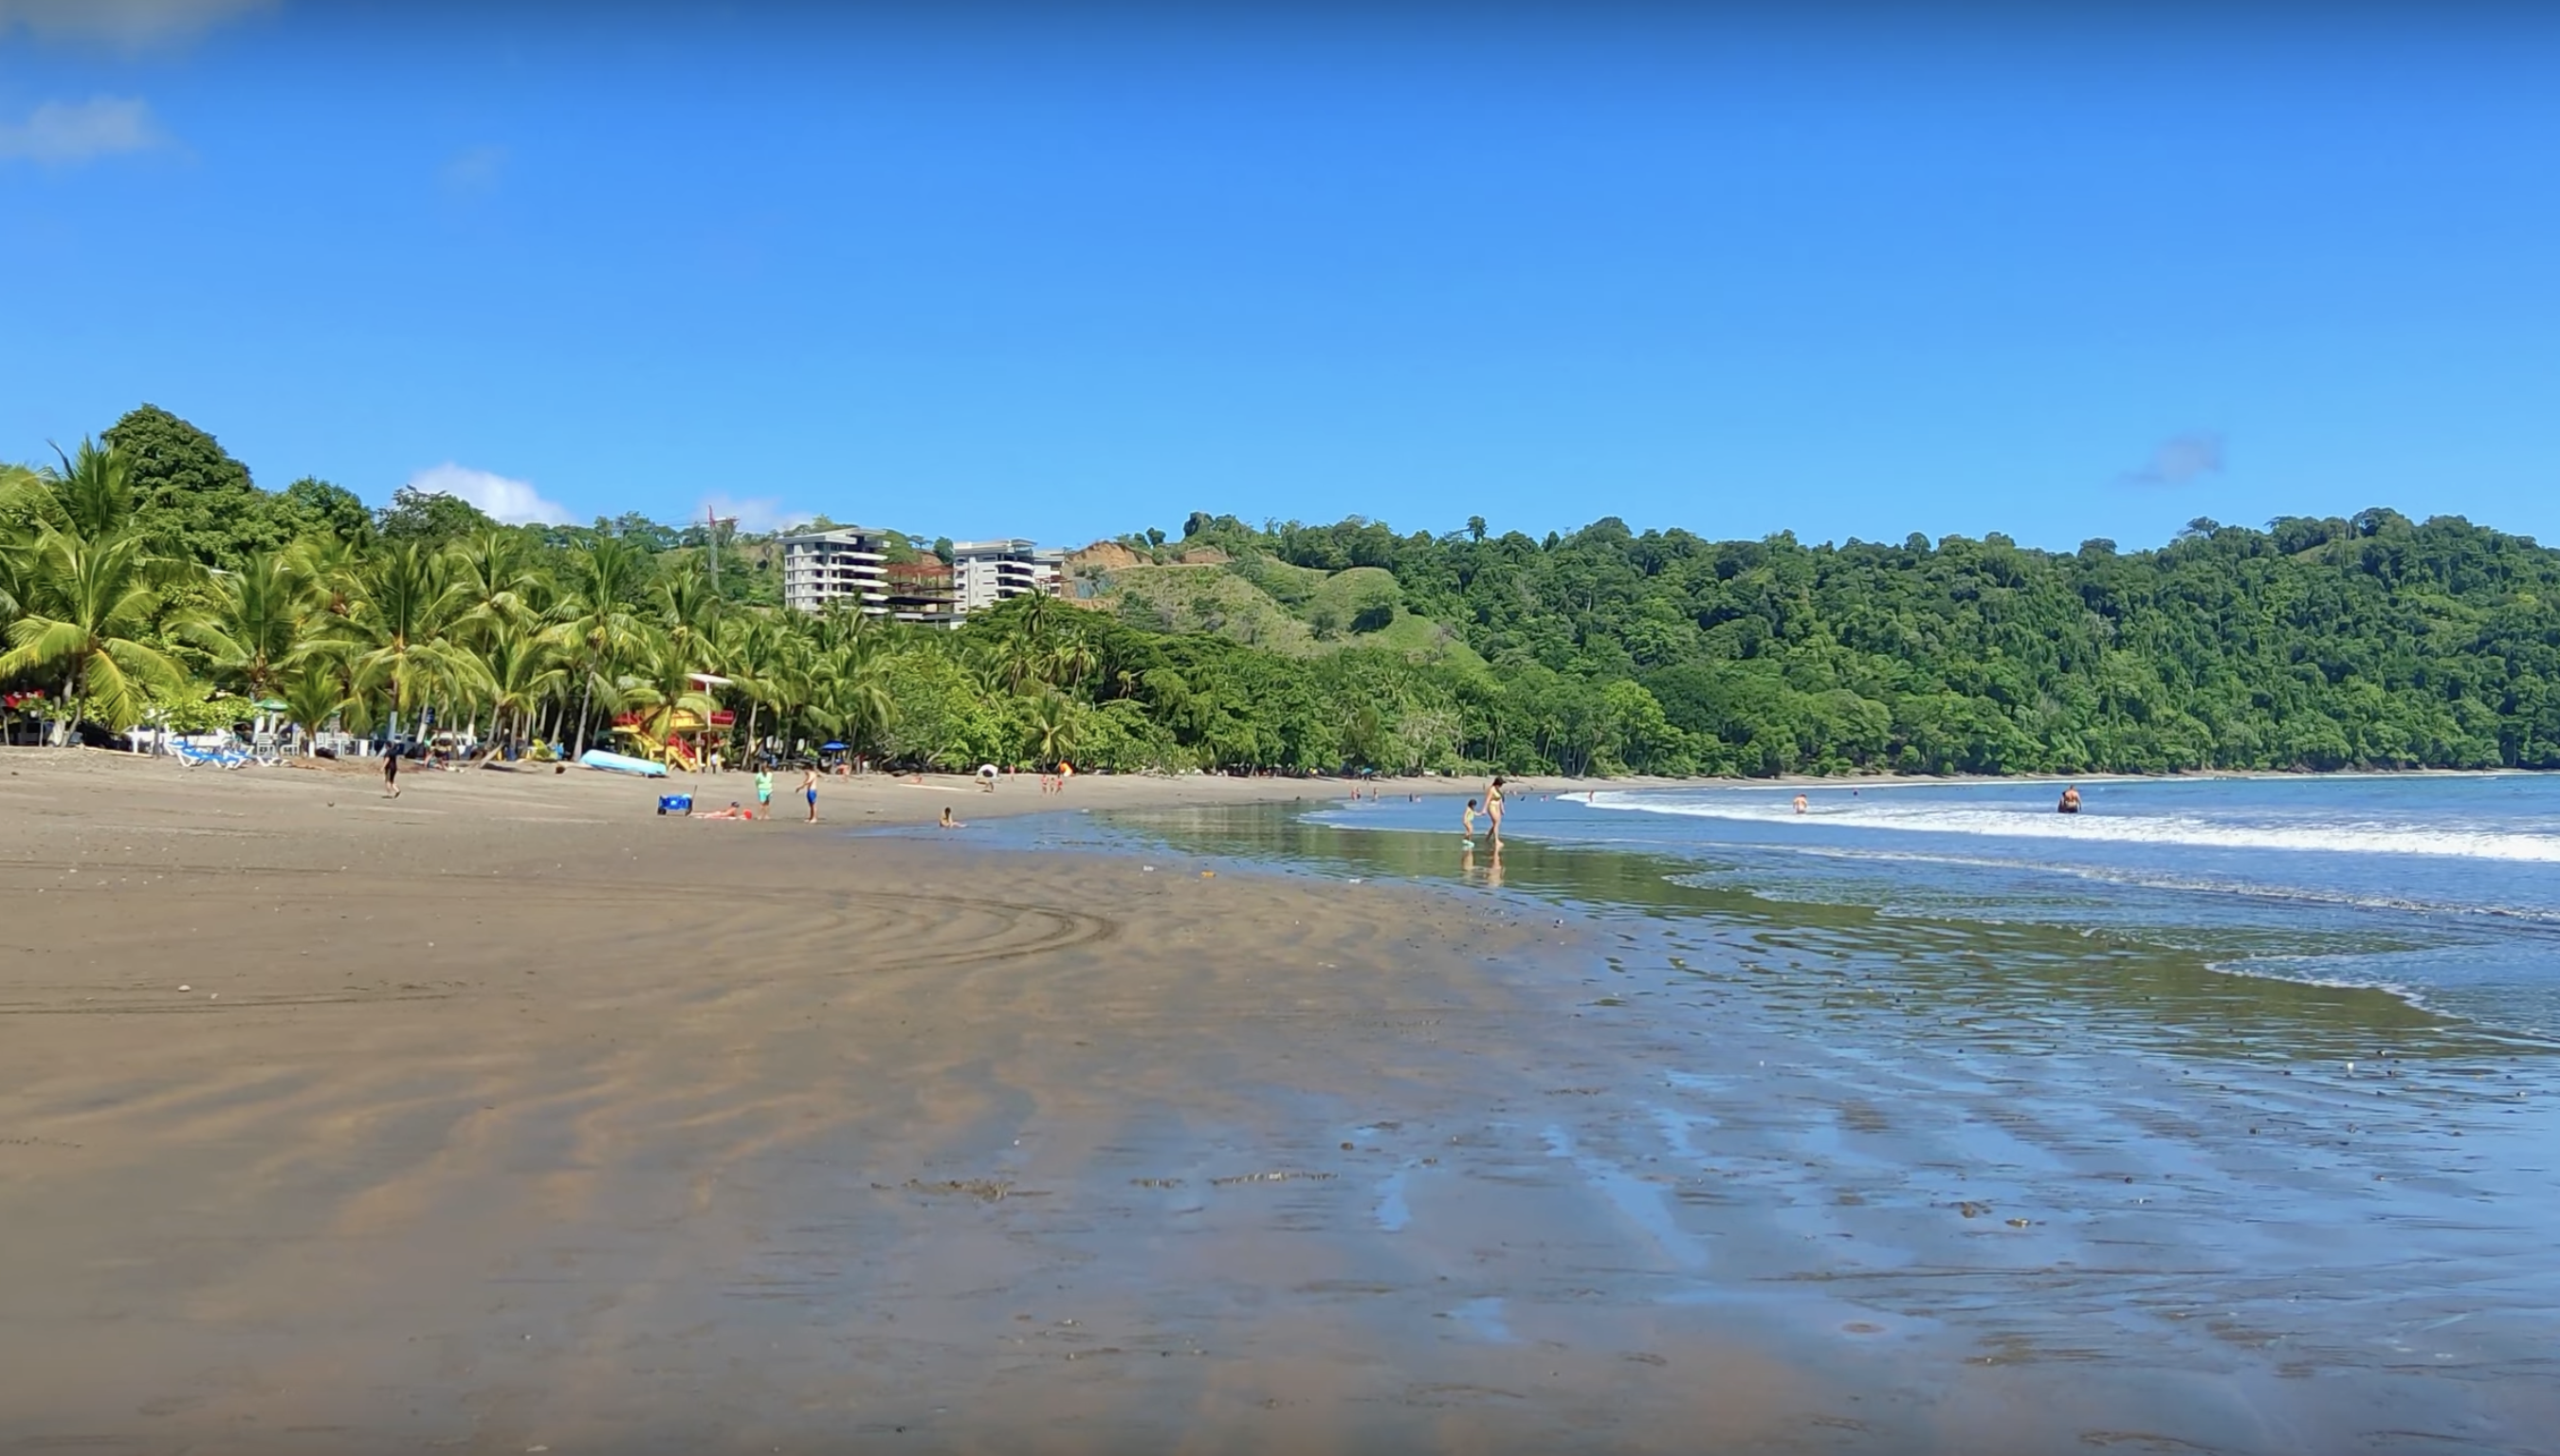 playa herradura beach puntarenas costa rica things to do stuff to see tourism tours vacations rentals visitor guides 32187